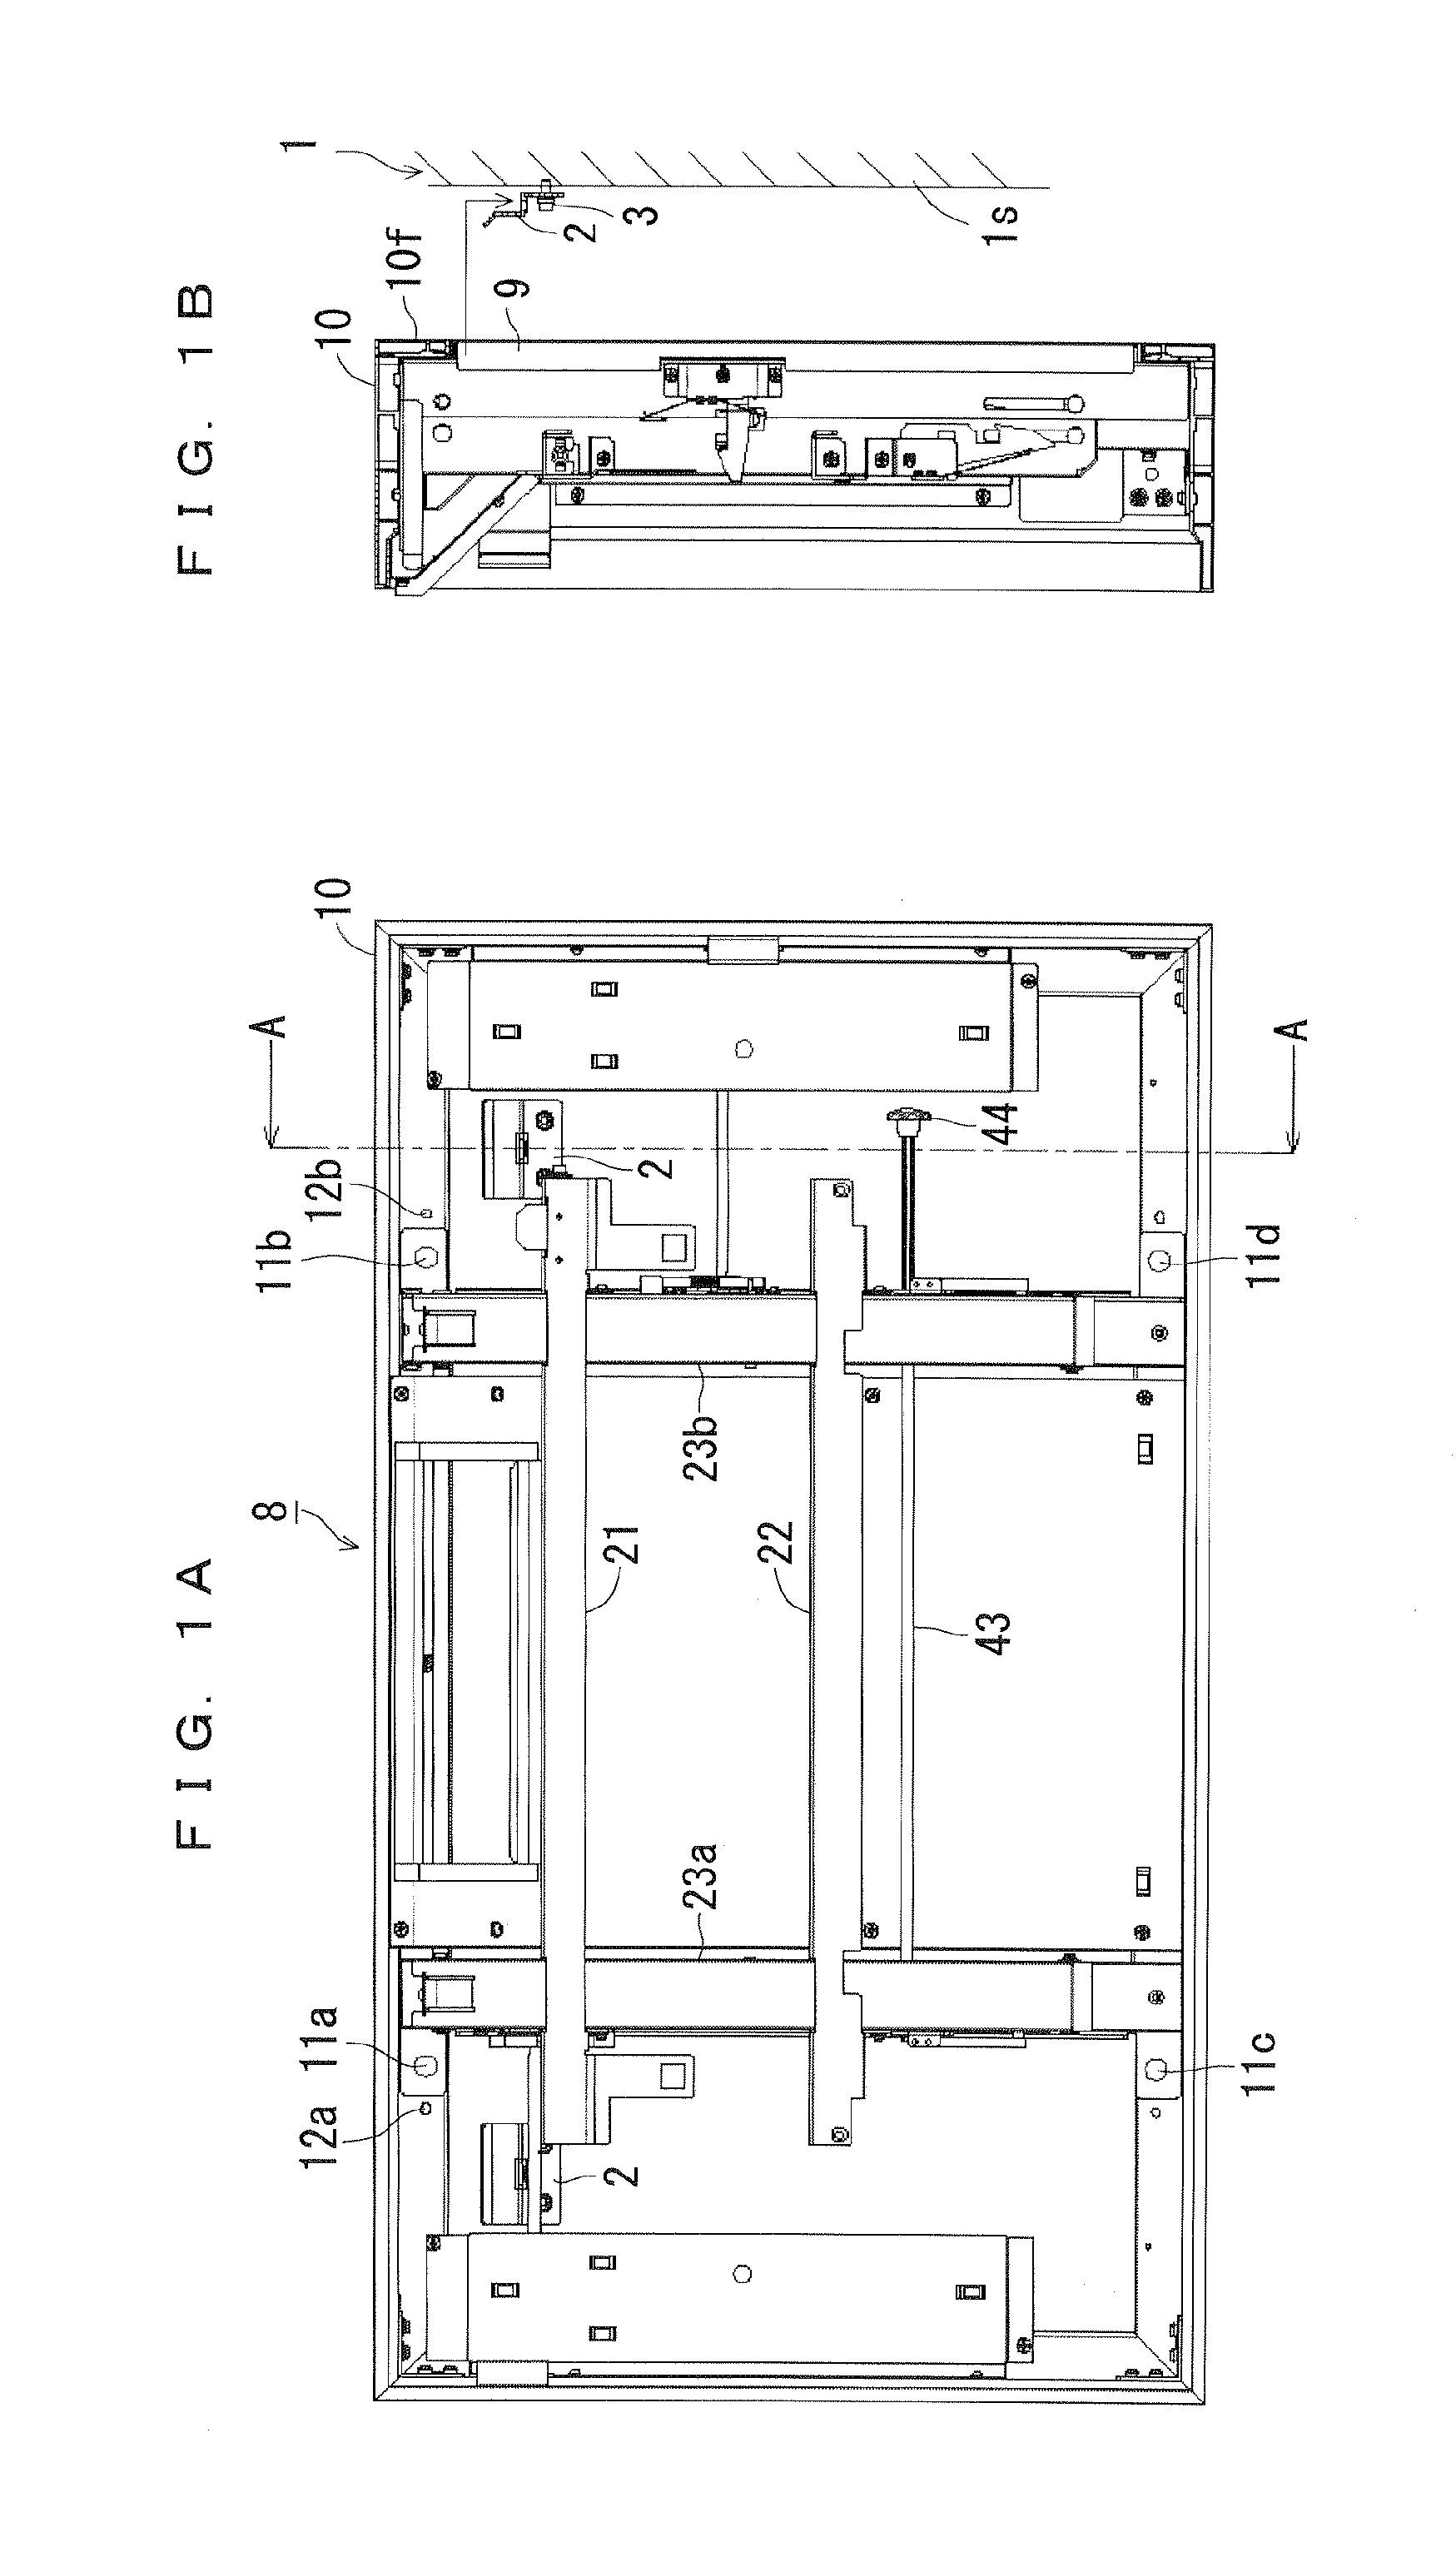 Wall-mounted attaching apparatus